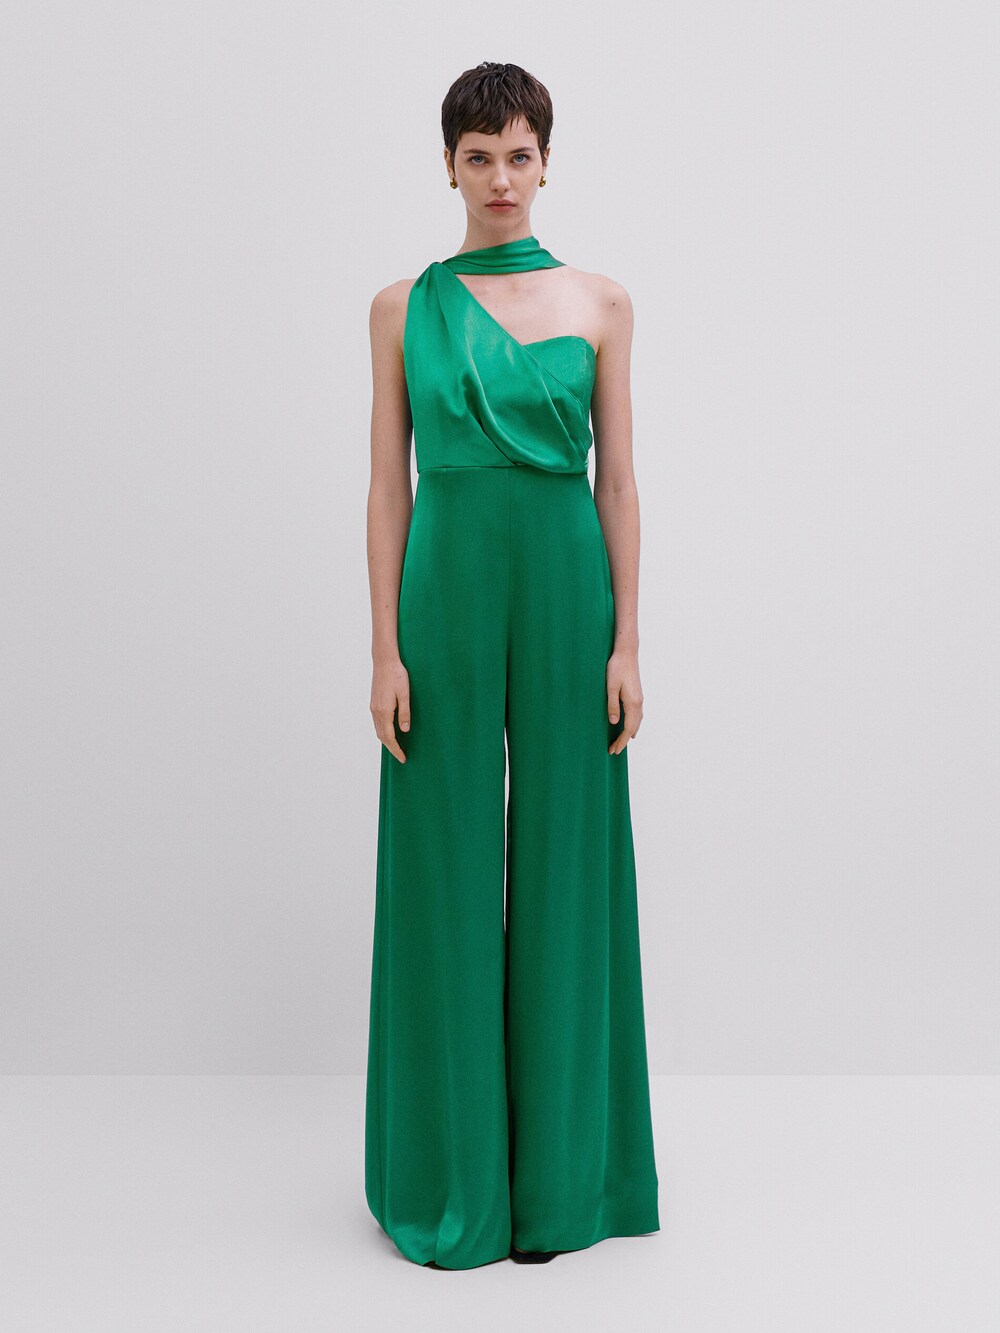 Massimo Dutti green Jumpsuit with a satin finish and exceptional drape, made of top-quality Italian fabric. The tie-style strap makes it a unique piece that offers multiple possibilities to add a different touch on each occasion.